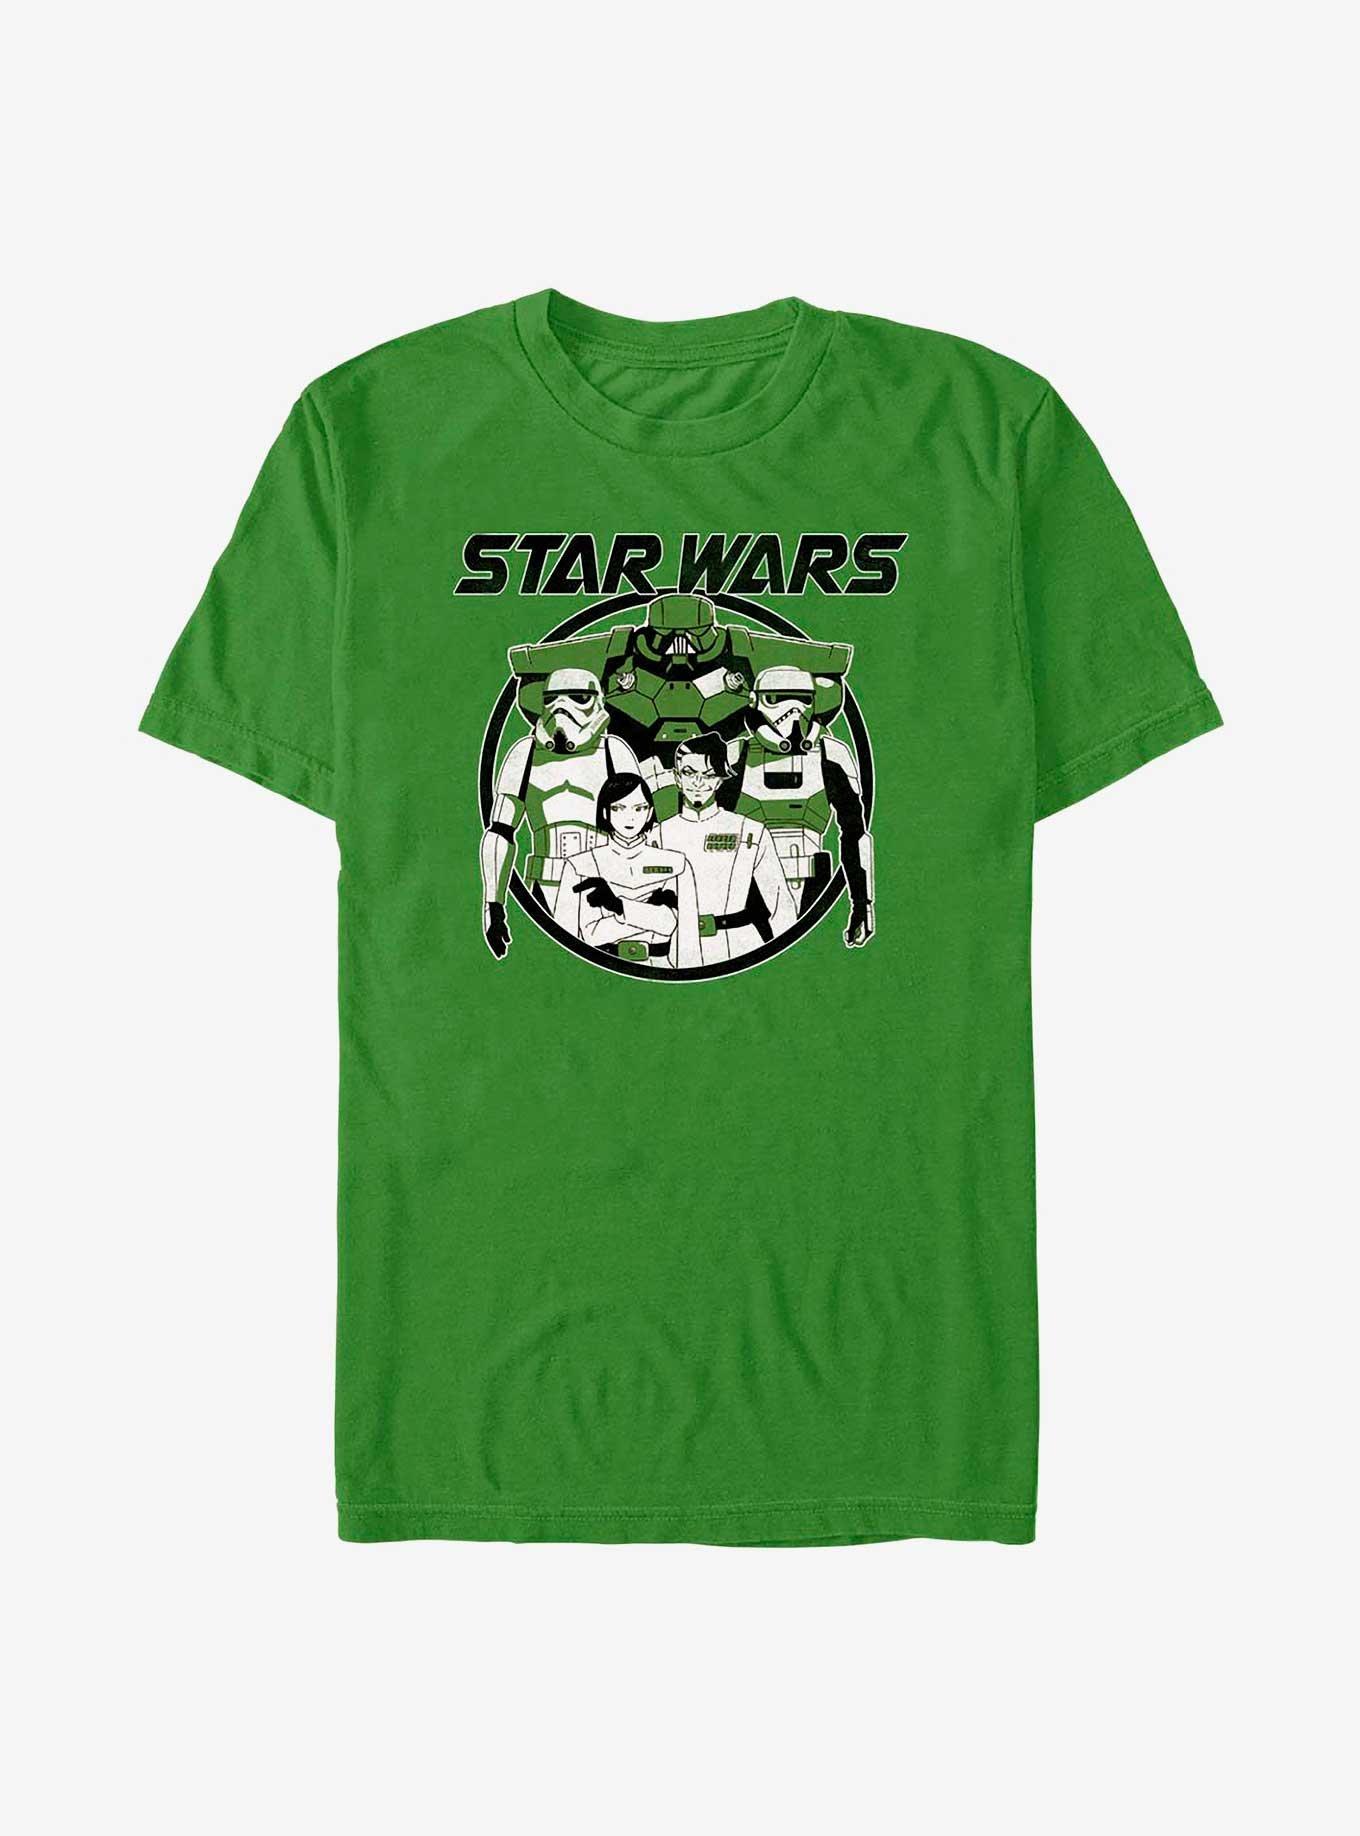 Star Wars: Visions The Dark Side Army Anime T-Shirt, KELLY, hi-res